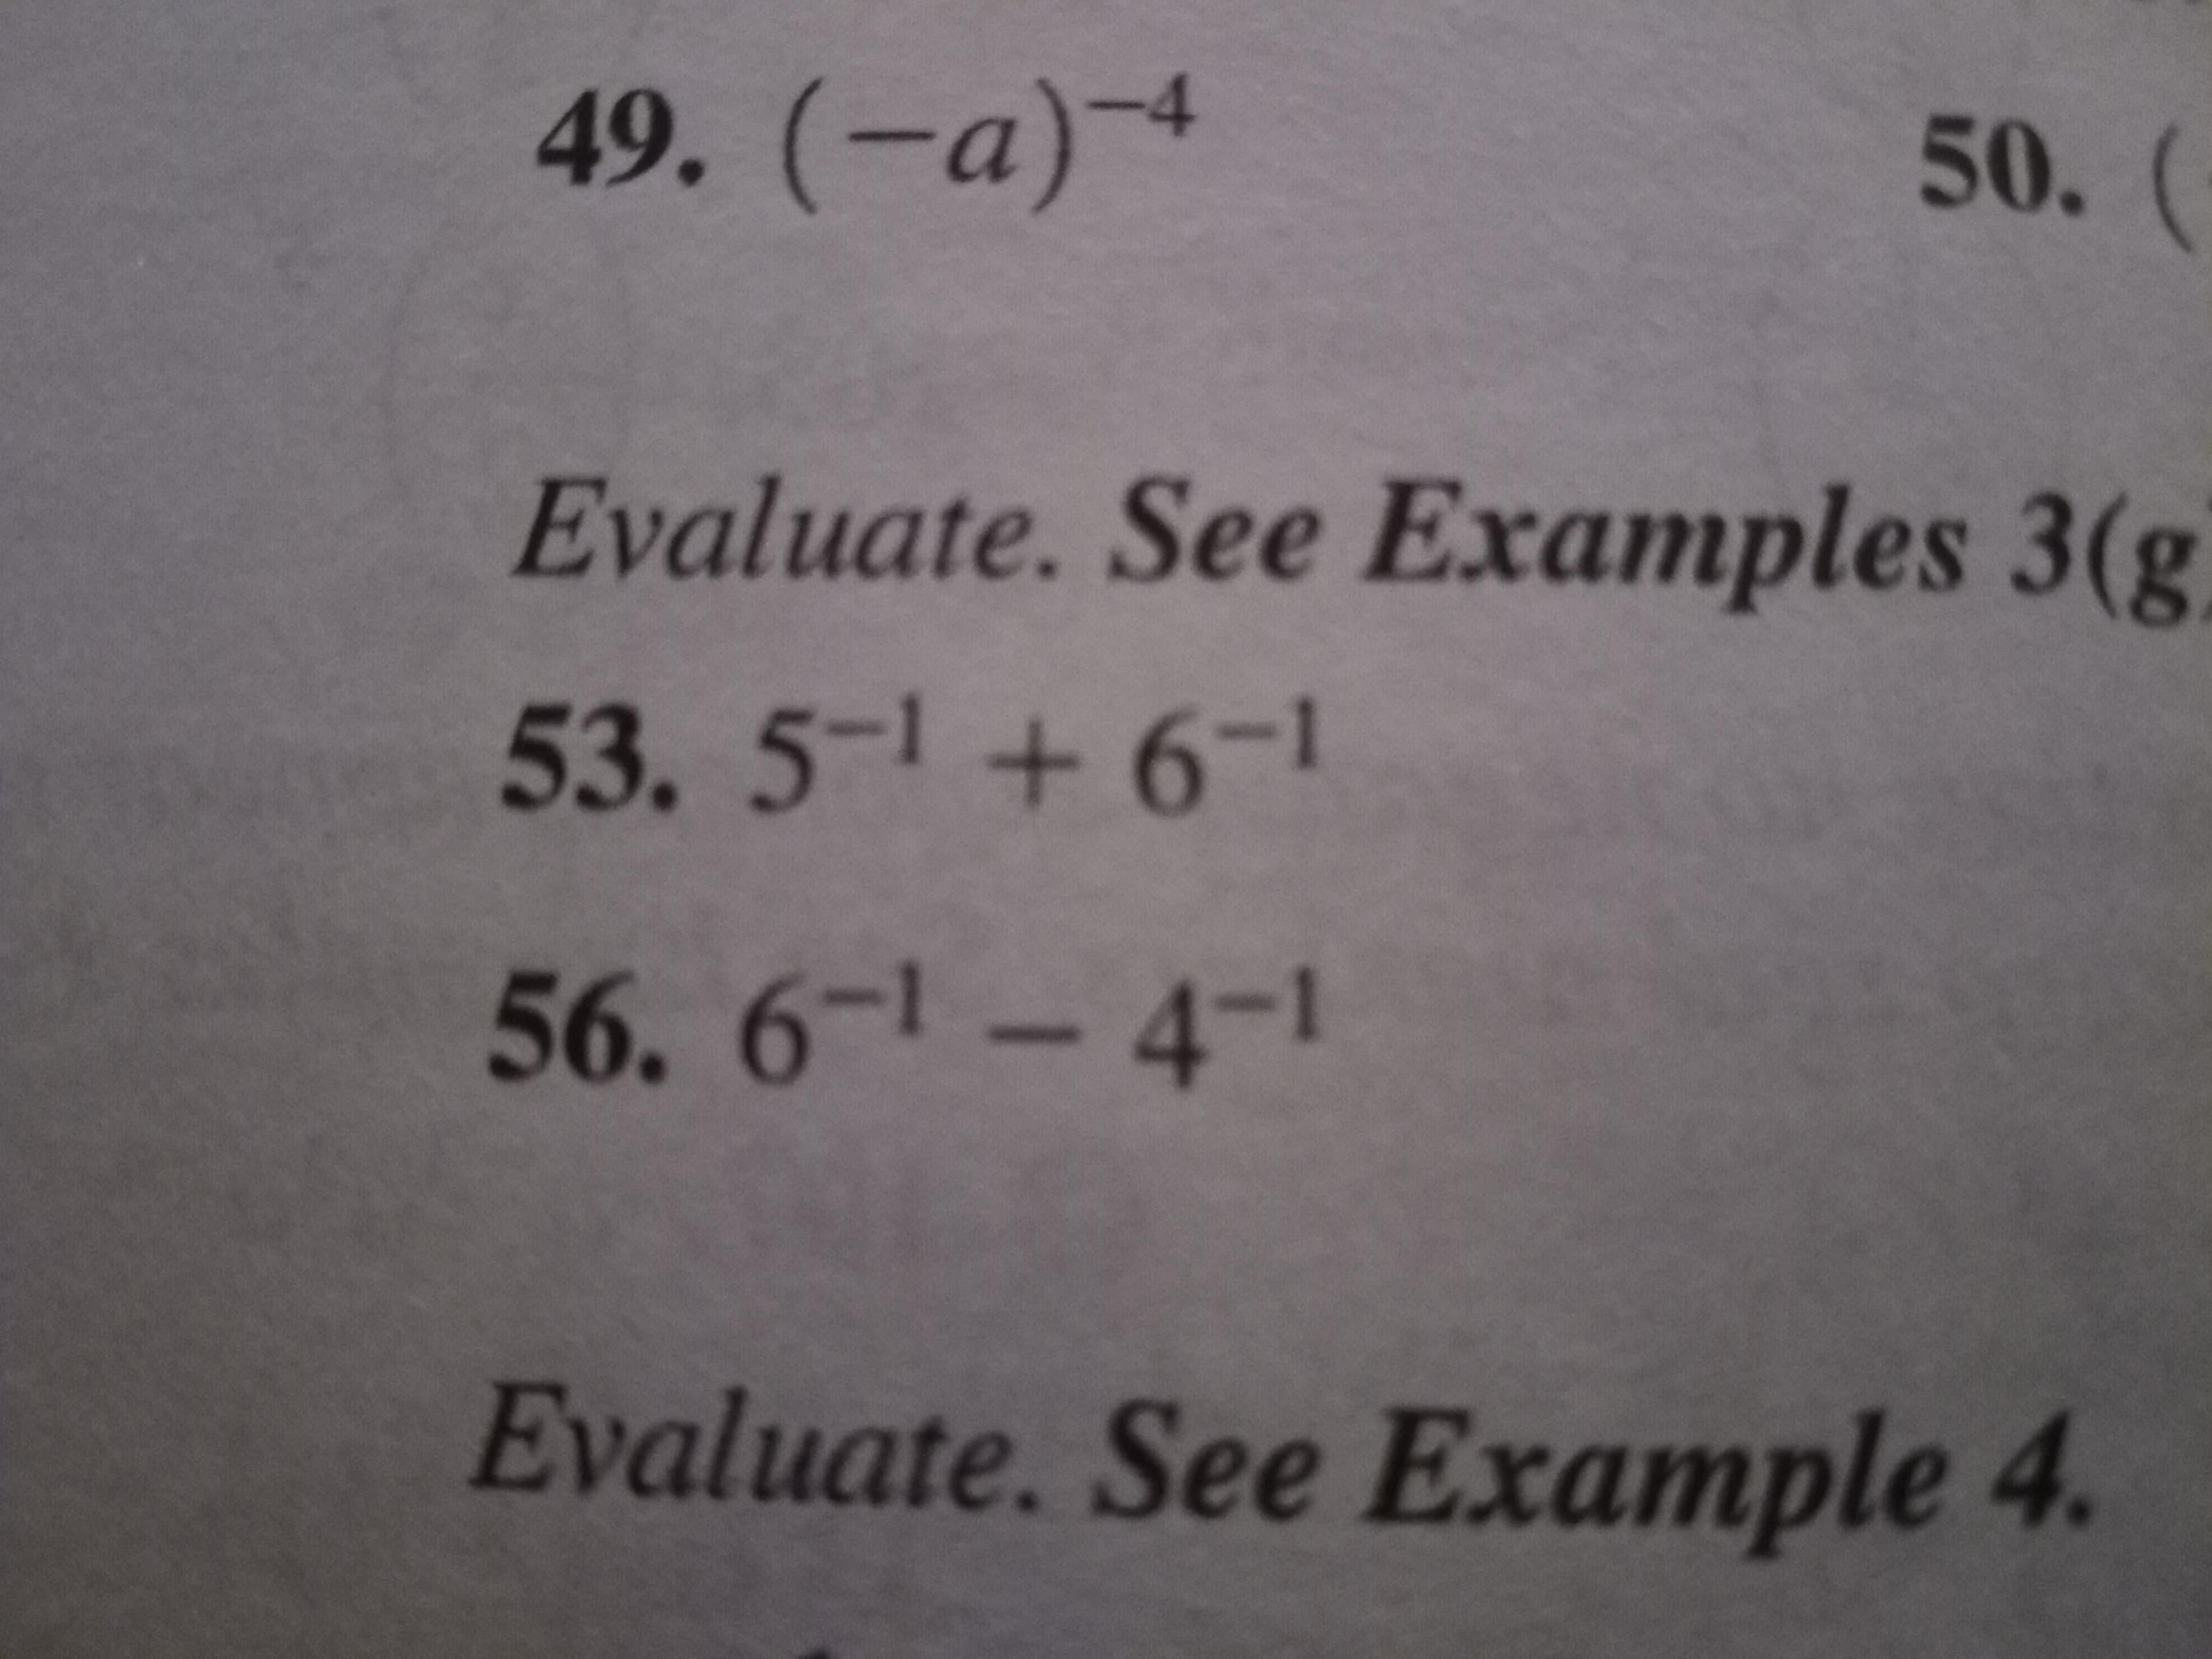 50. (
49. (-а)4
Evaluate. See Examples 3(g
53. 51 +6-1
56. 6-1-4-1
Evaluate. See Example 4.
